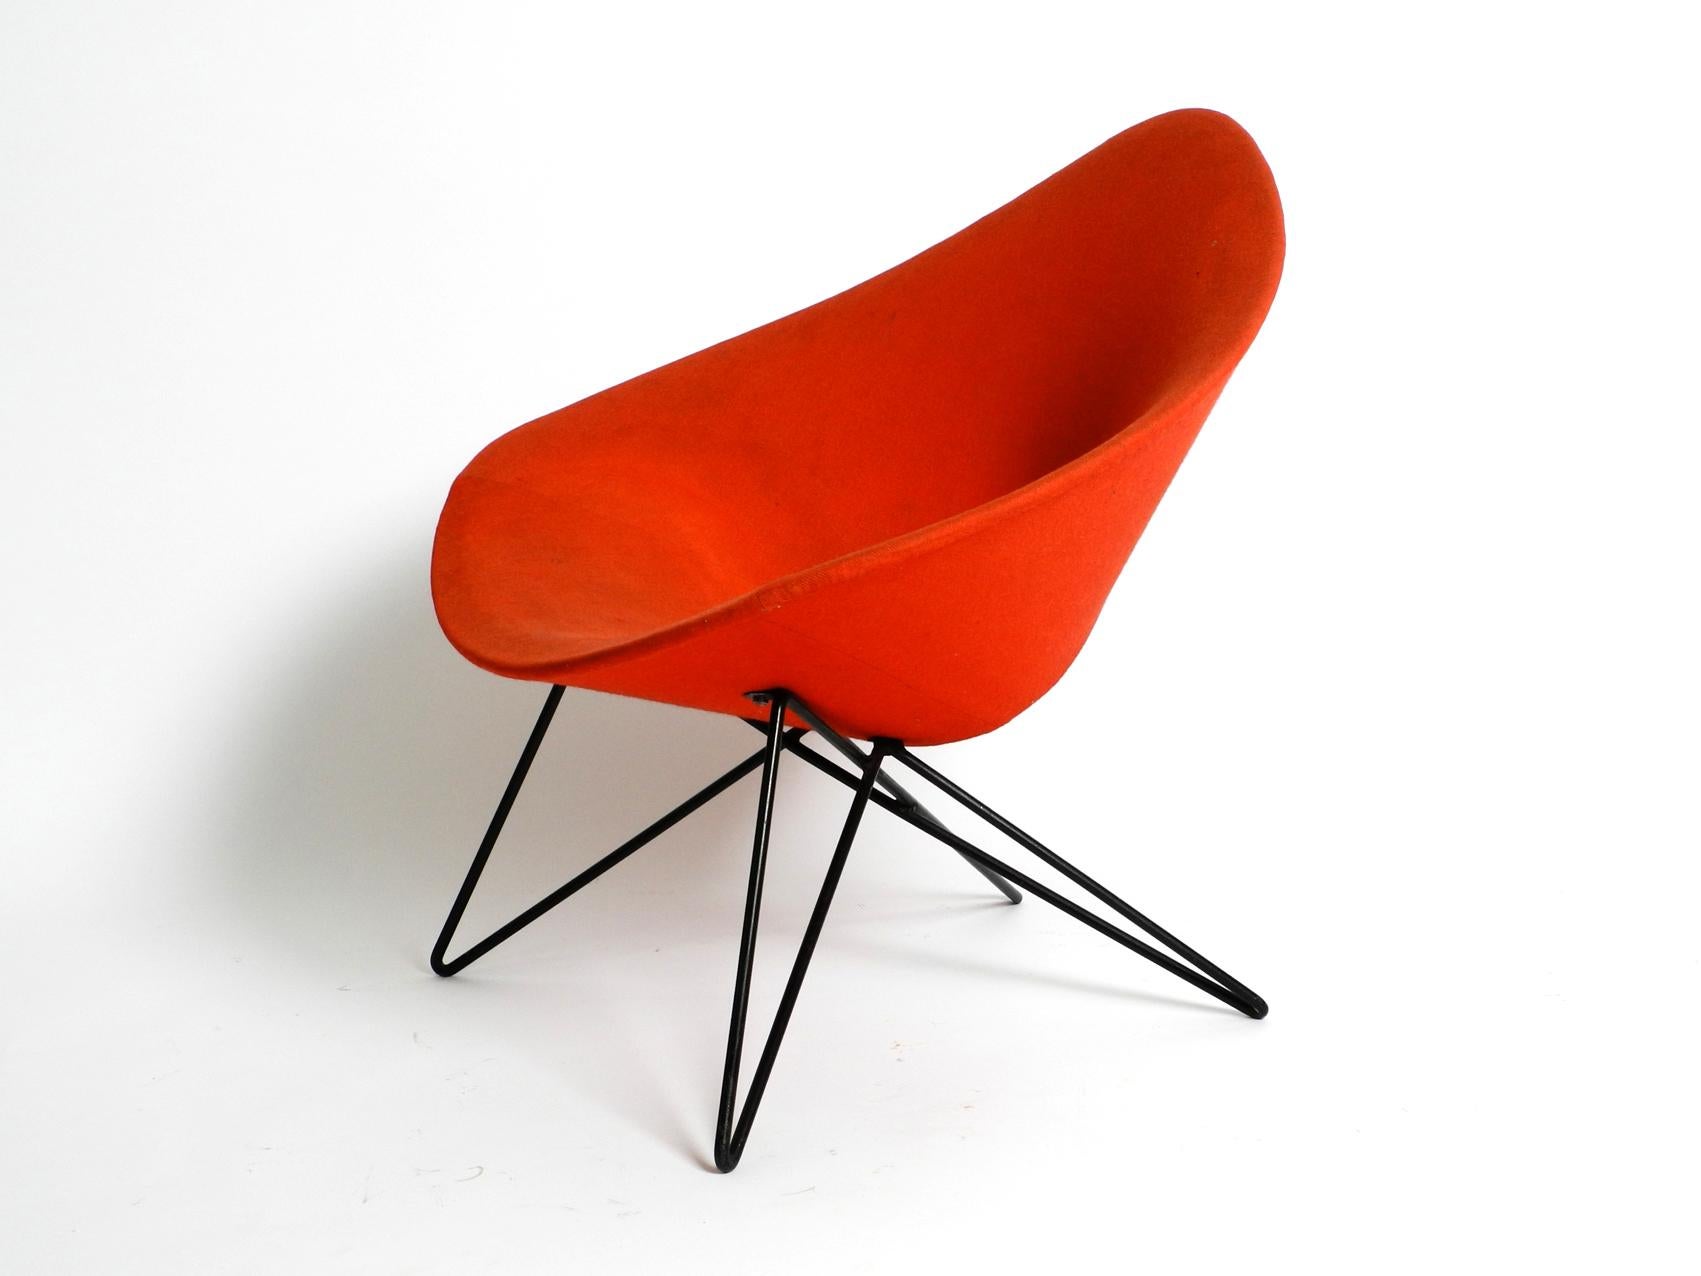 Very rare Italian Mid-Century Modern lounge chair with original fabric cover. Great nice design of the 1950s in very good vintage condition.
Base is made of a strong black metal tube in hairpin design. High quality processed and with good seating